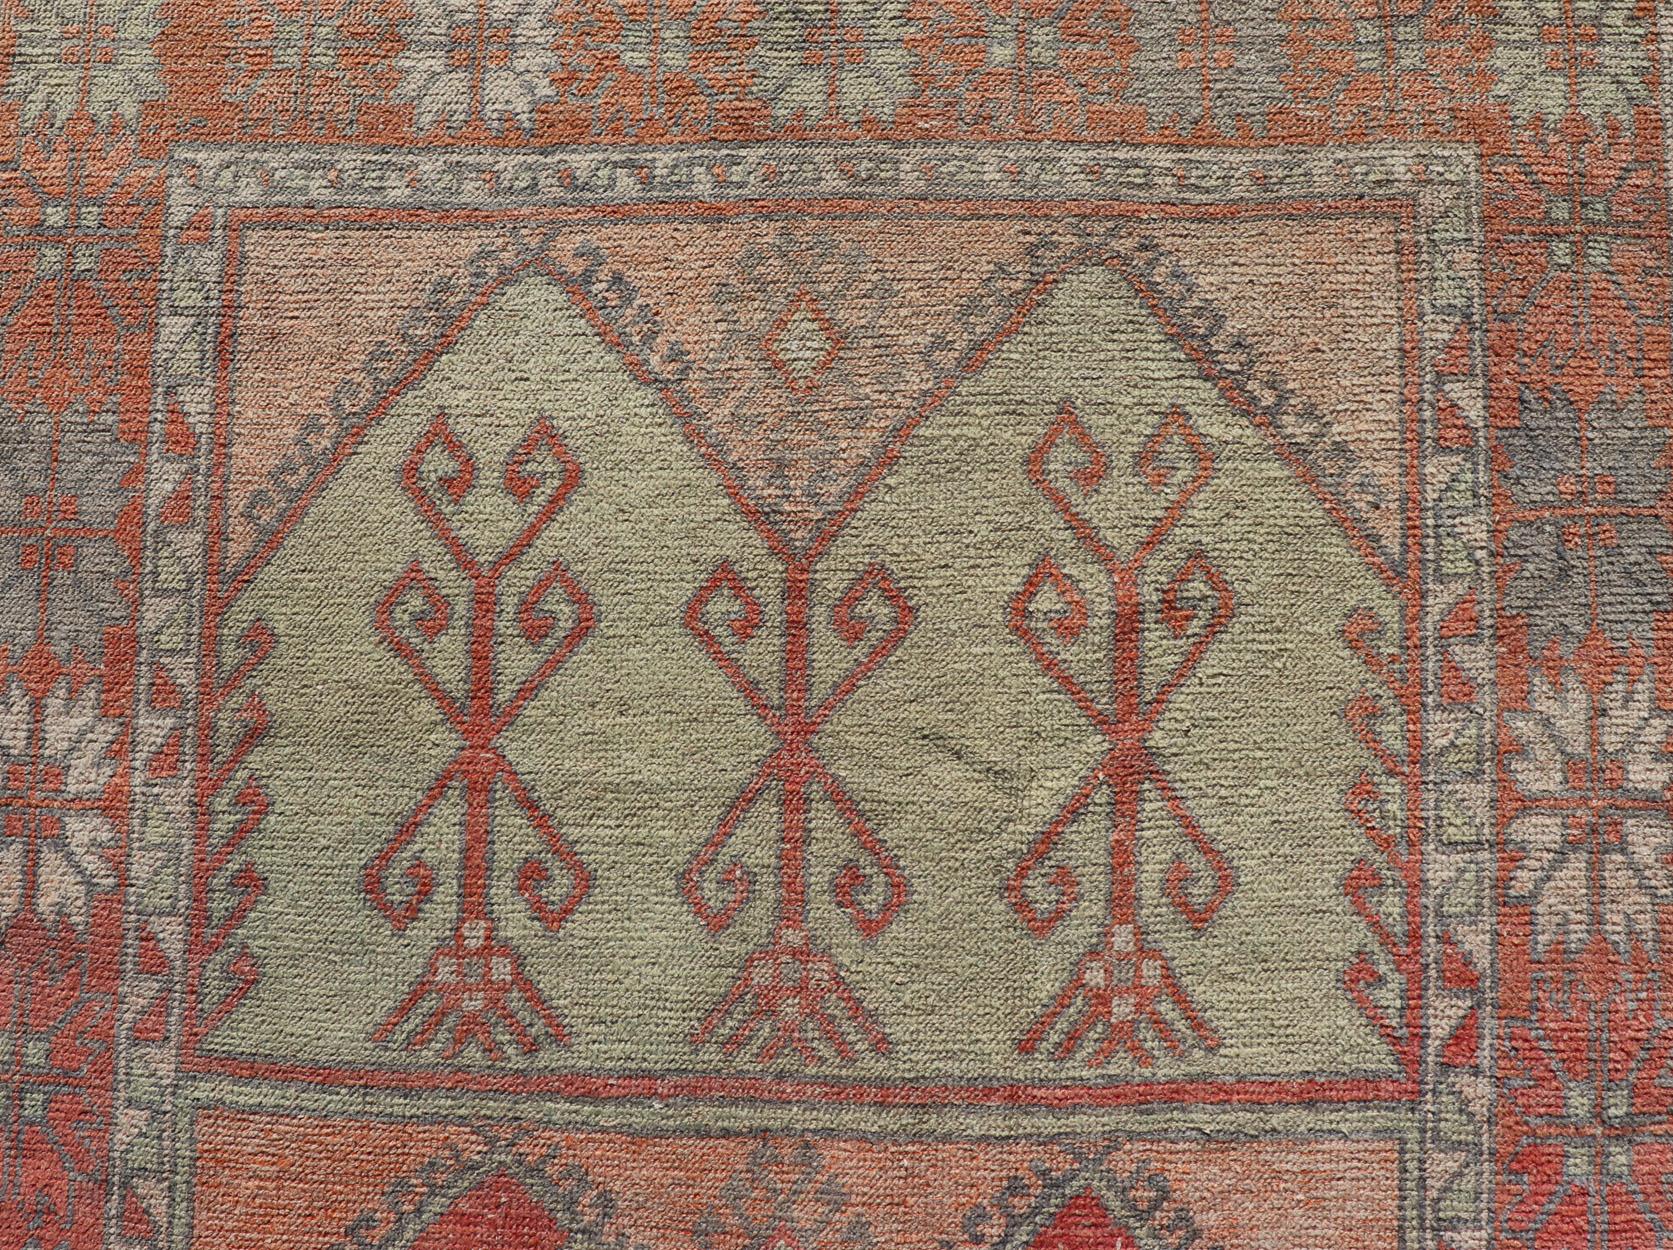 Gallery Rug, Vintage Turkish in Faded Red, Coral, Orange, Soft Pink and Green For Sale 7